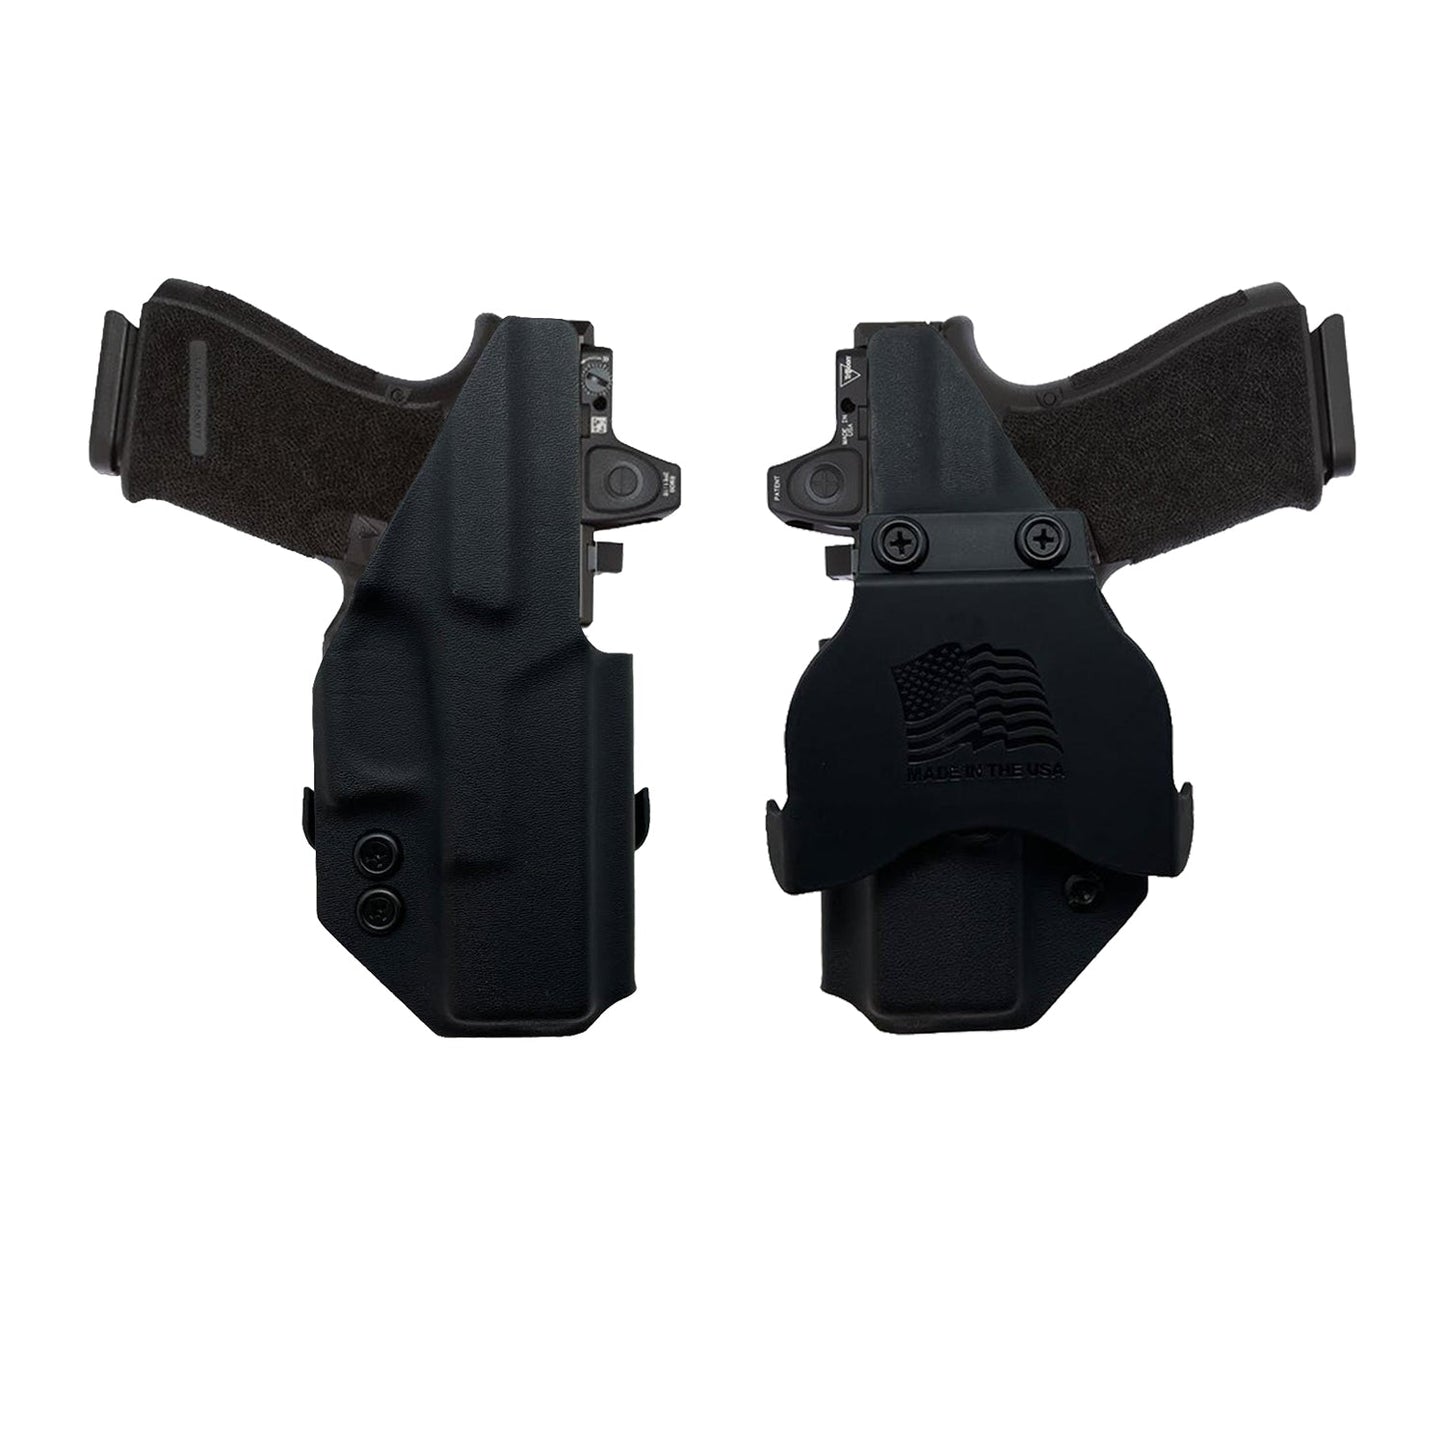 SIG P365XL With LIMA Light/ Laser OWB (Outside The Waistband Holster)